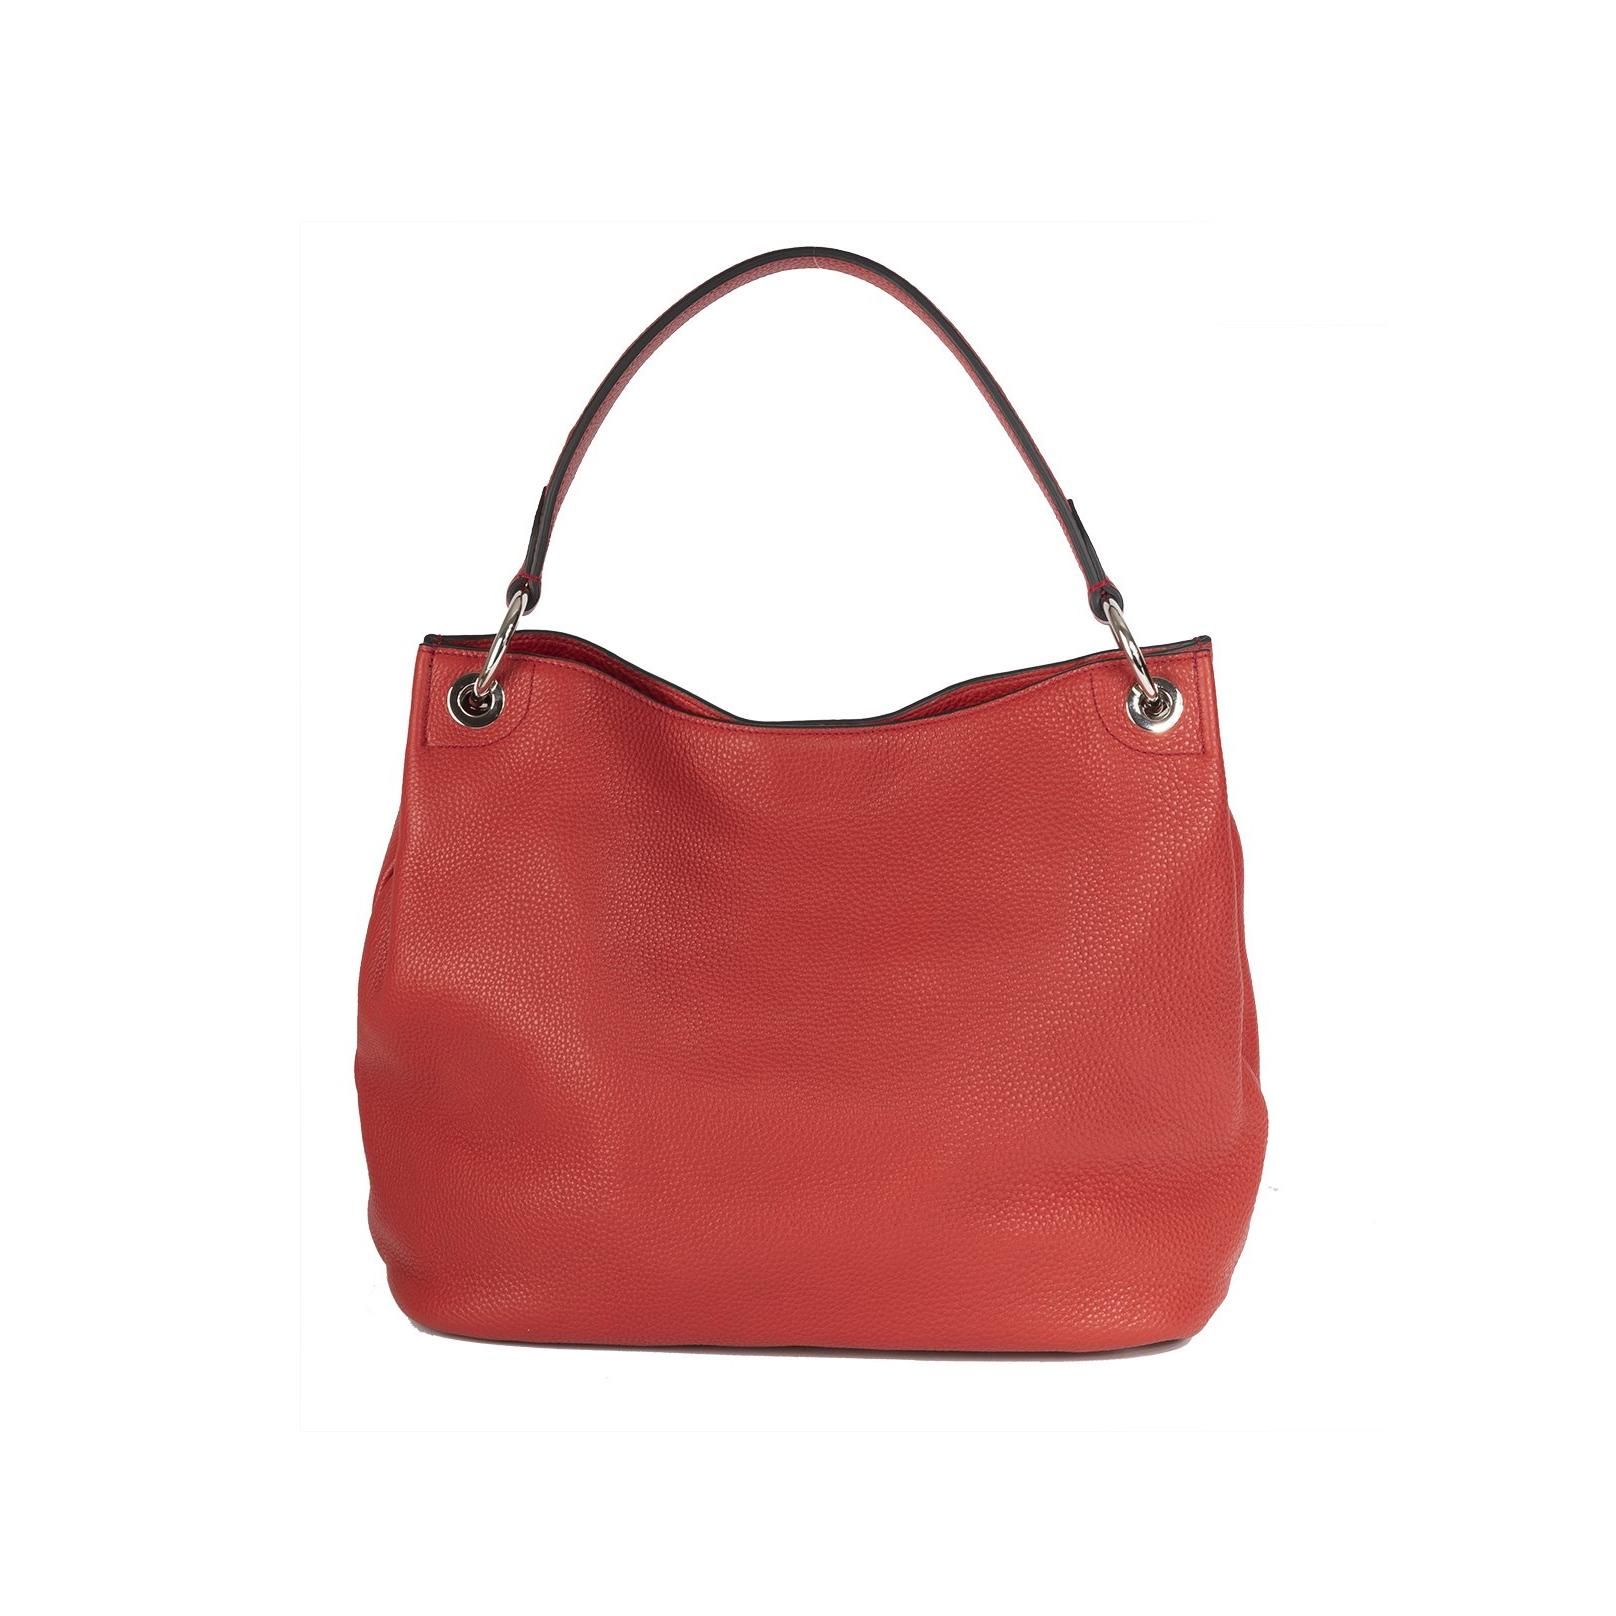 This bag features red Vitello Daino Leather, silver-tone hardware, a single flat shoulder strap, dual slip pockets at sides, a logo at front, black logo jacquard Interior lining and snap closure at the top.

COLOR: Red
MATERIAL: Leather
ITEM CODE: